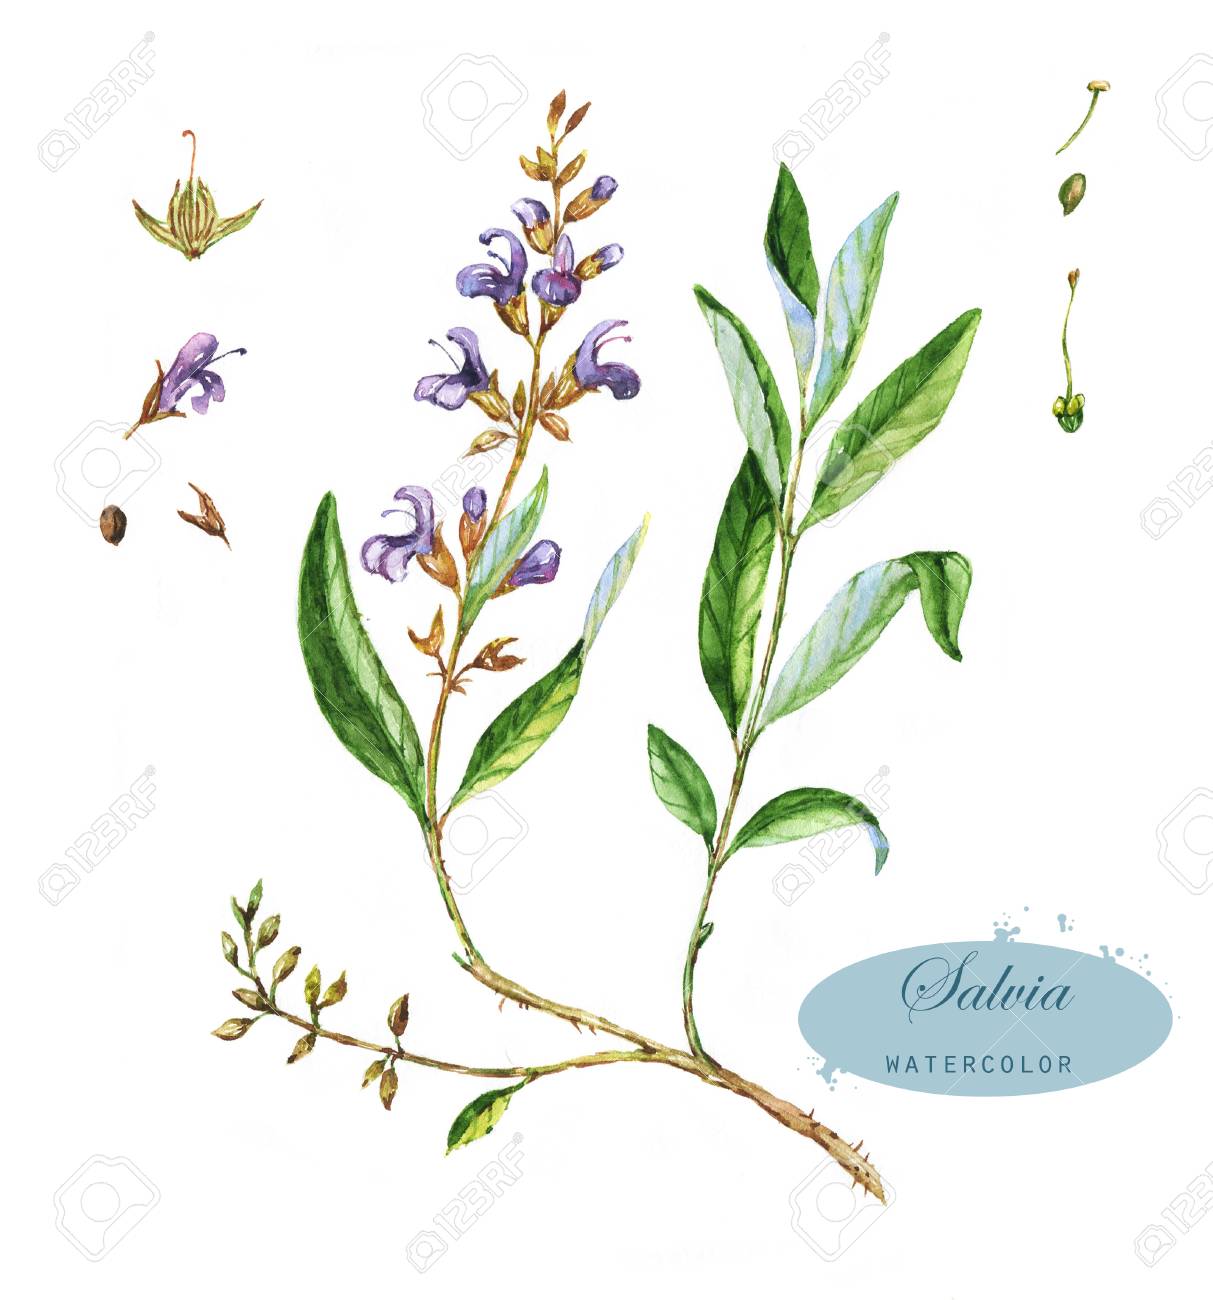 Hand Drawn Watercolor Illustration Of The Salvia Botanical